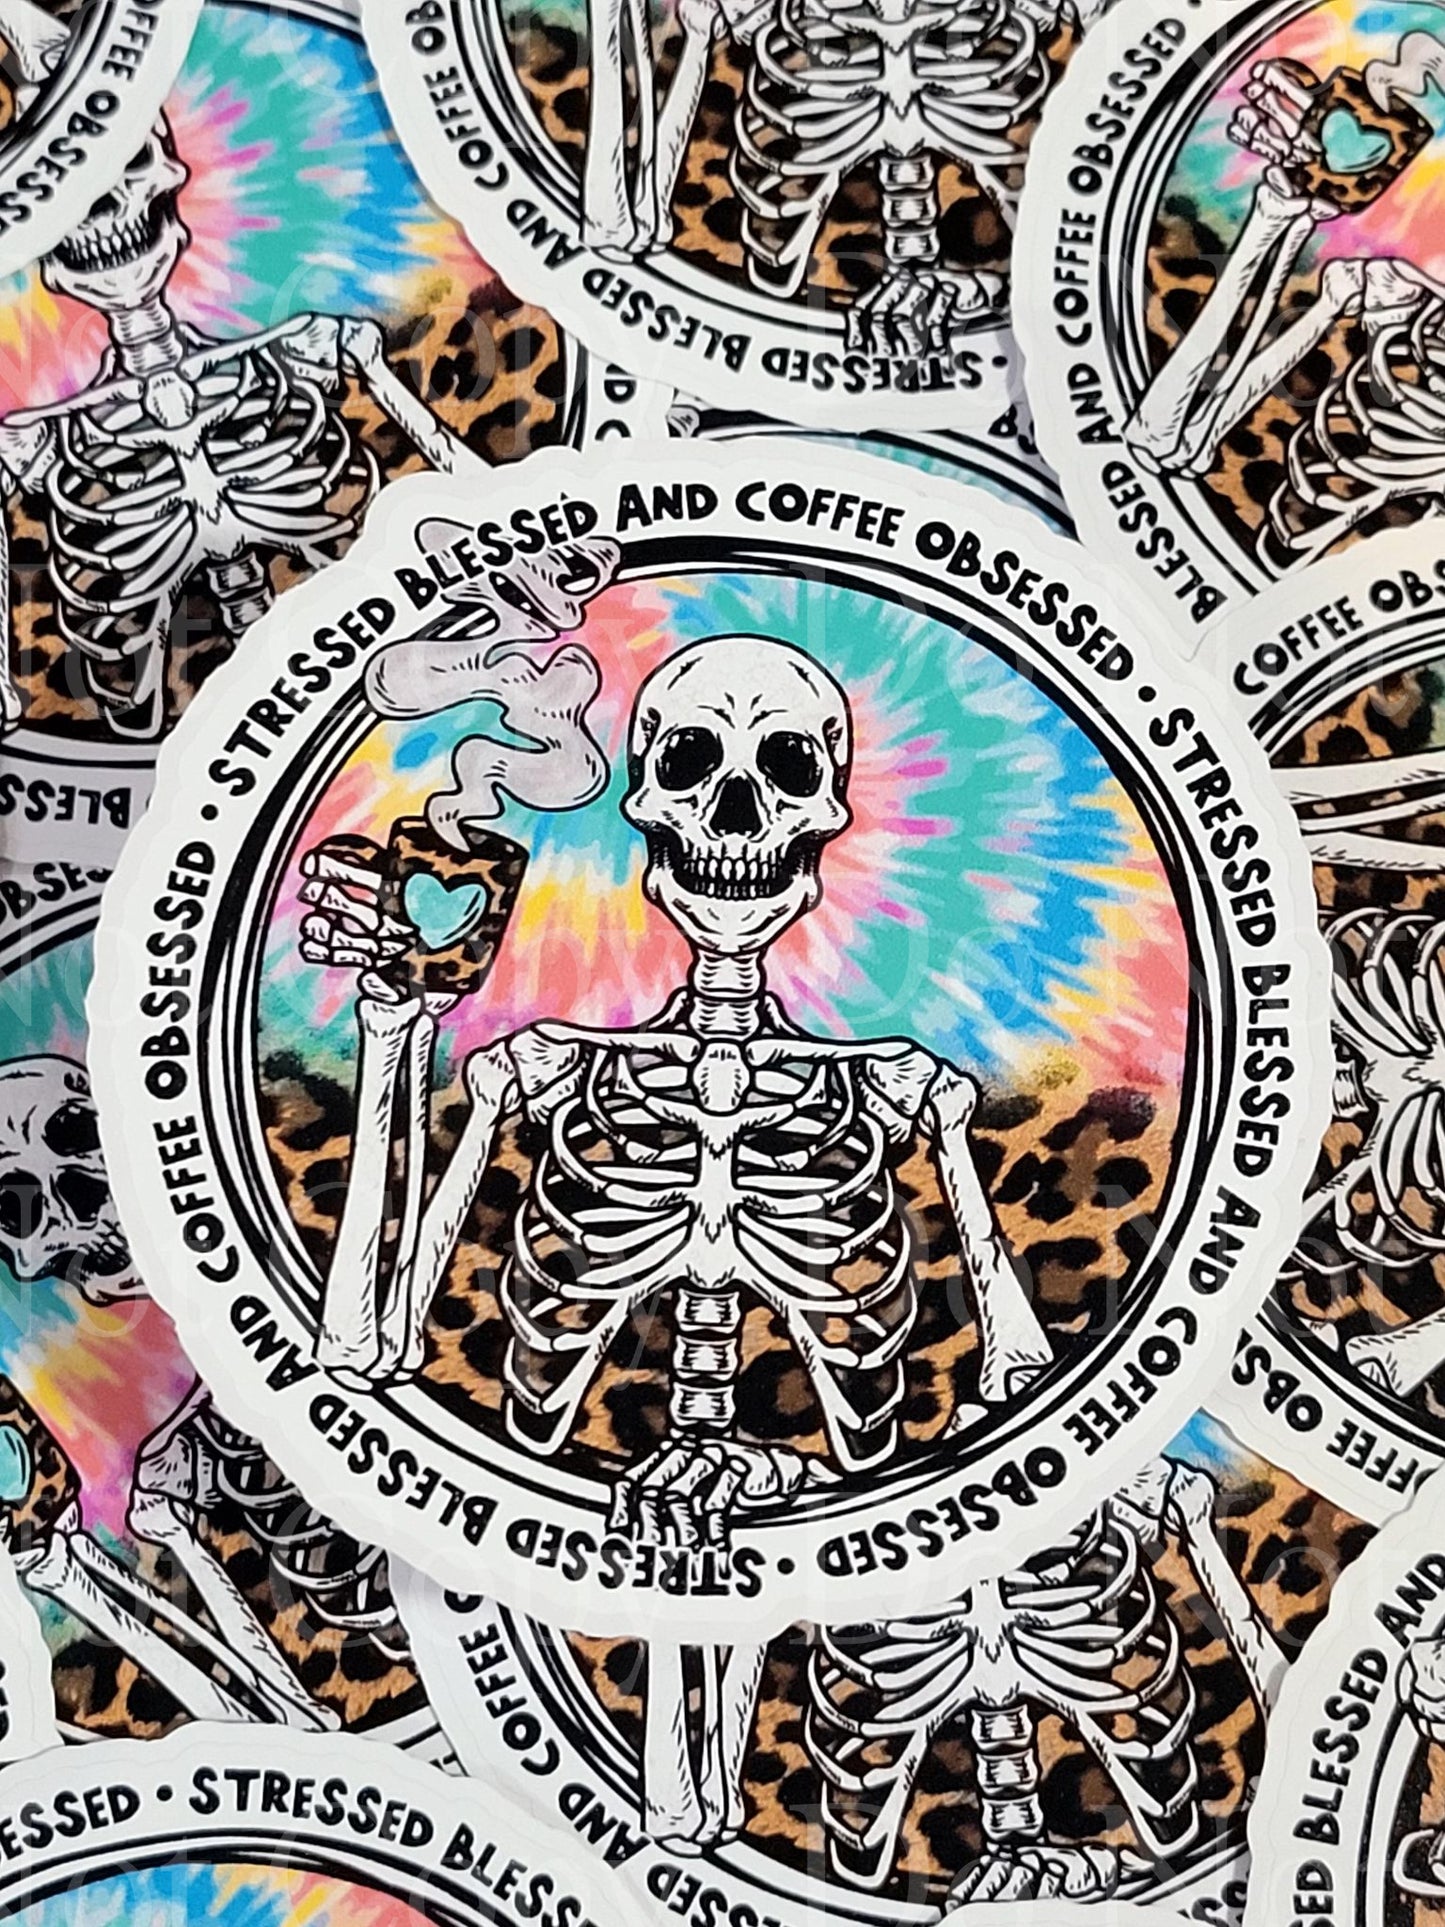 Stressed blessed and coffee obsessed skeleton Die cut sticker 3-5 Business Day TAT.